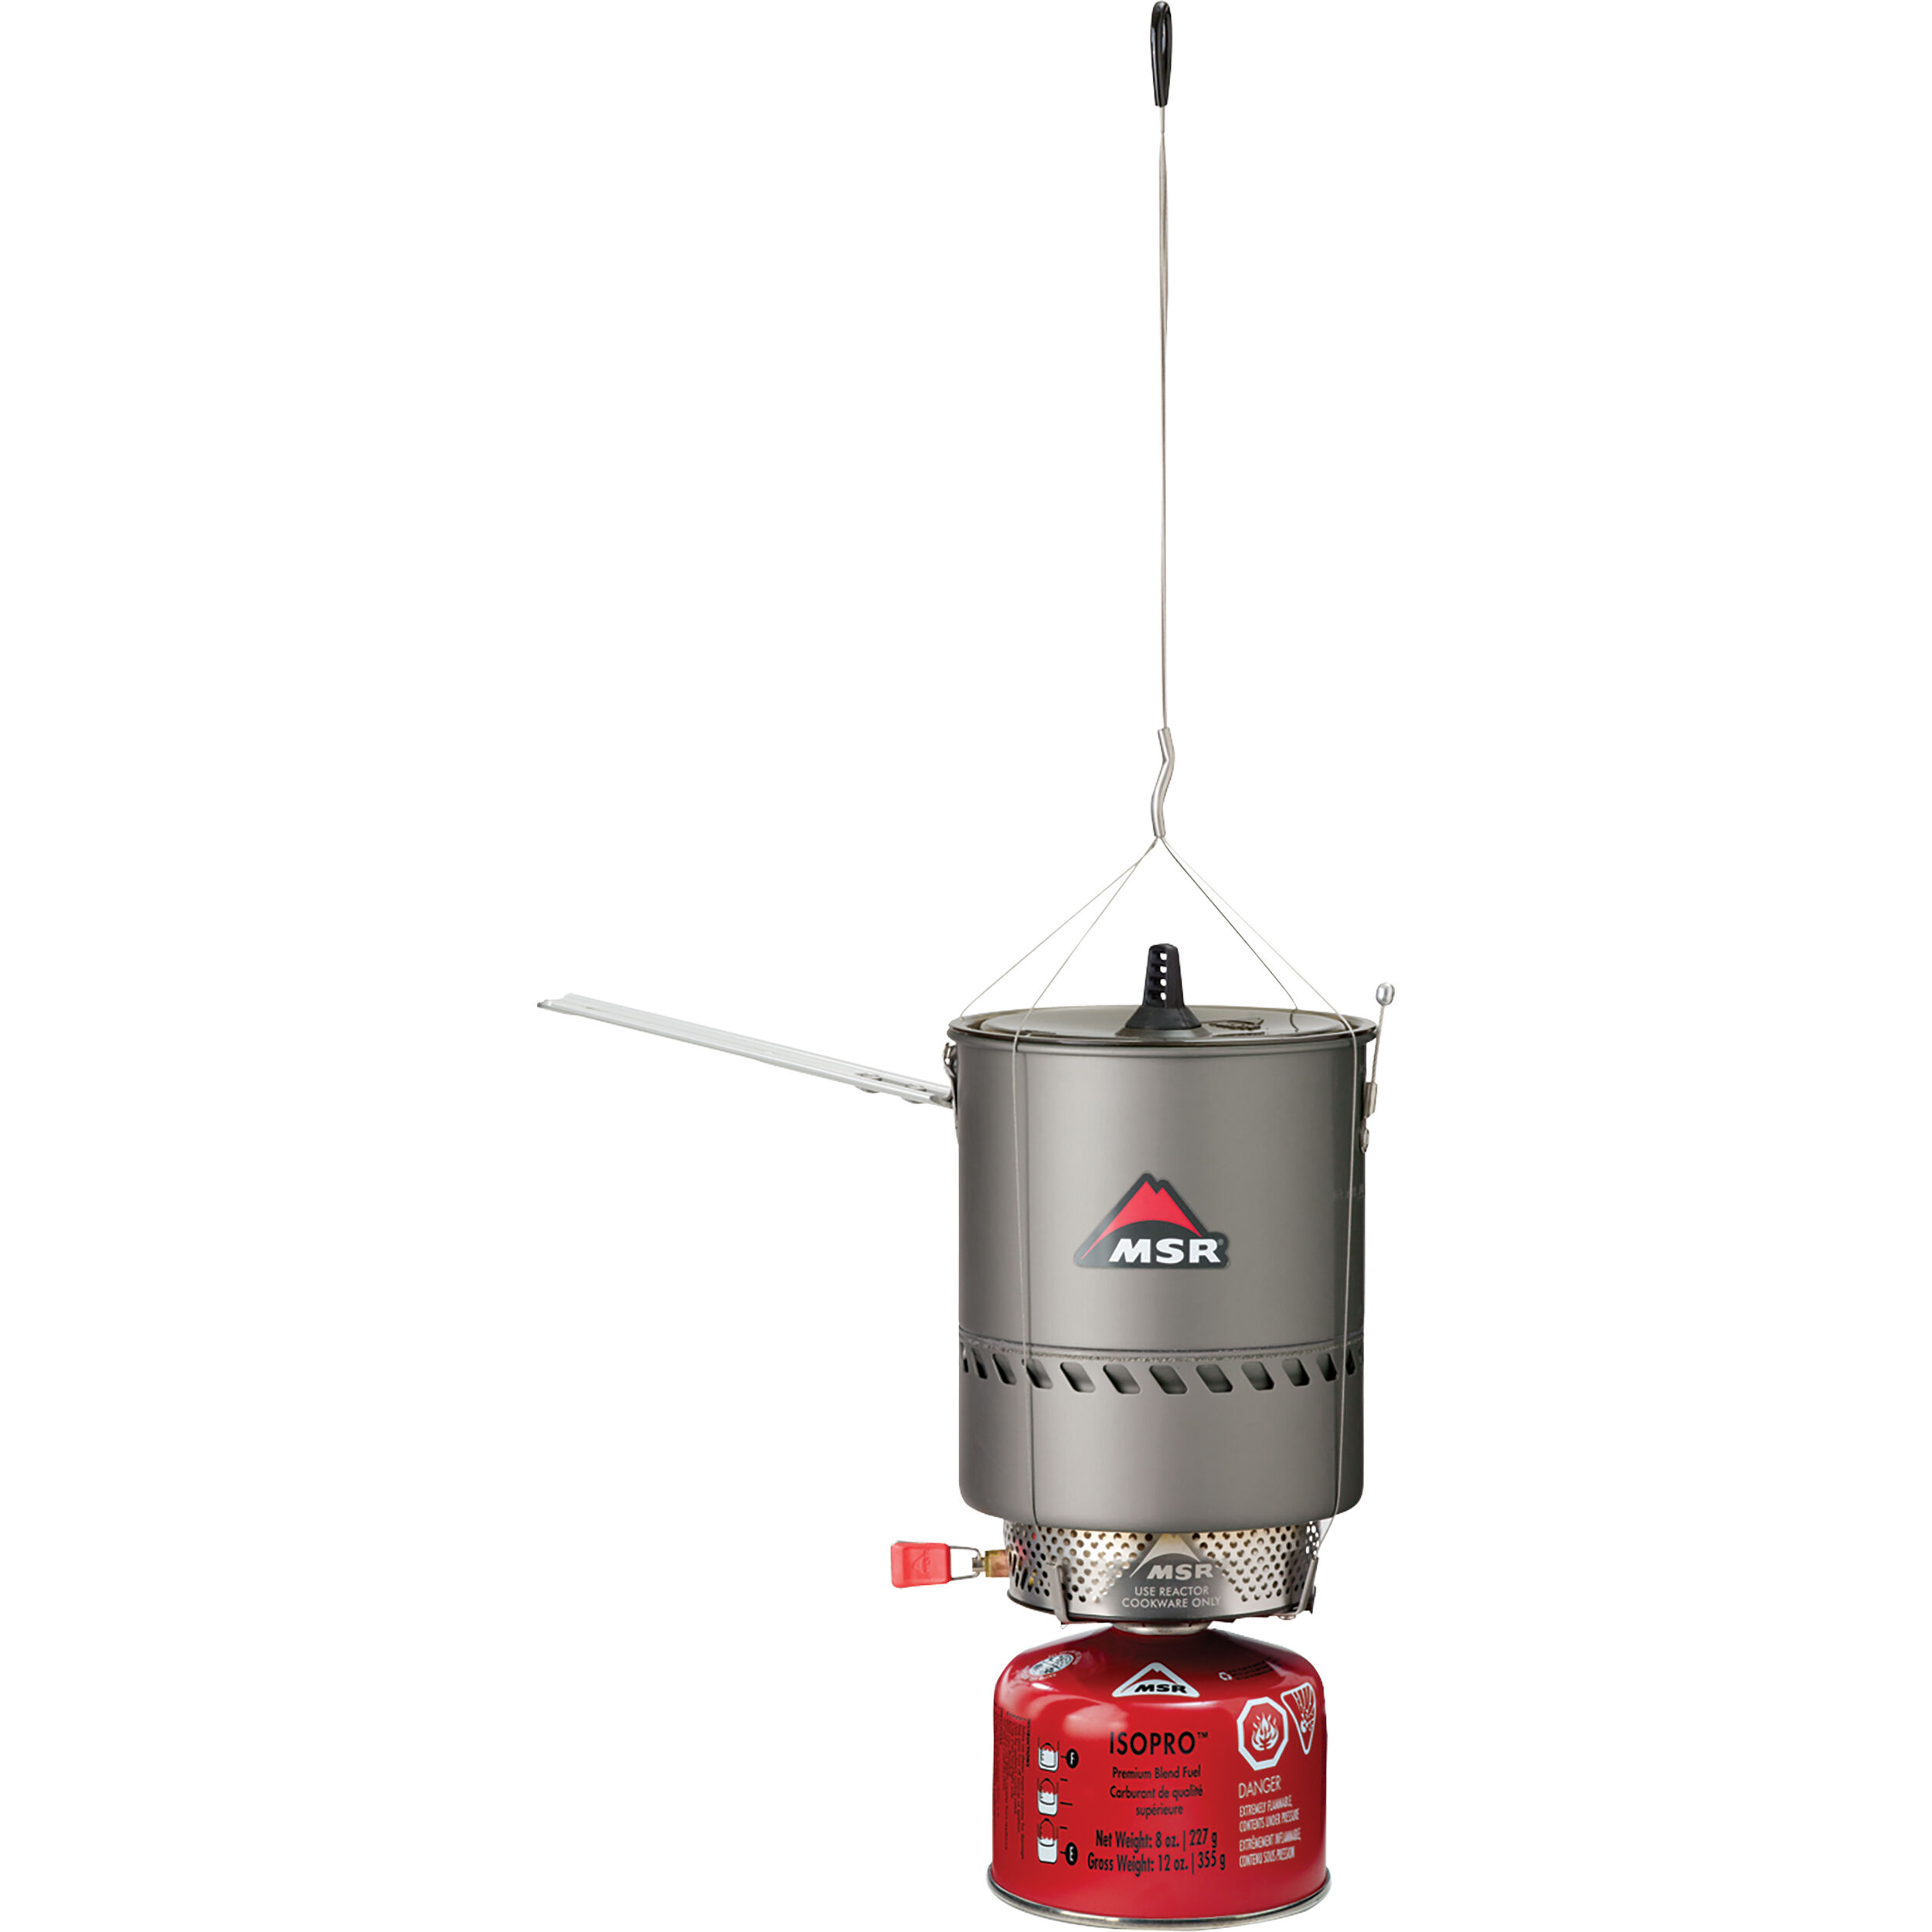 Reactor® Stove Systems - All-Condition Camp Stove | MSR®